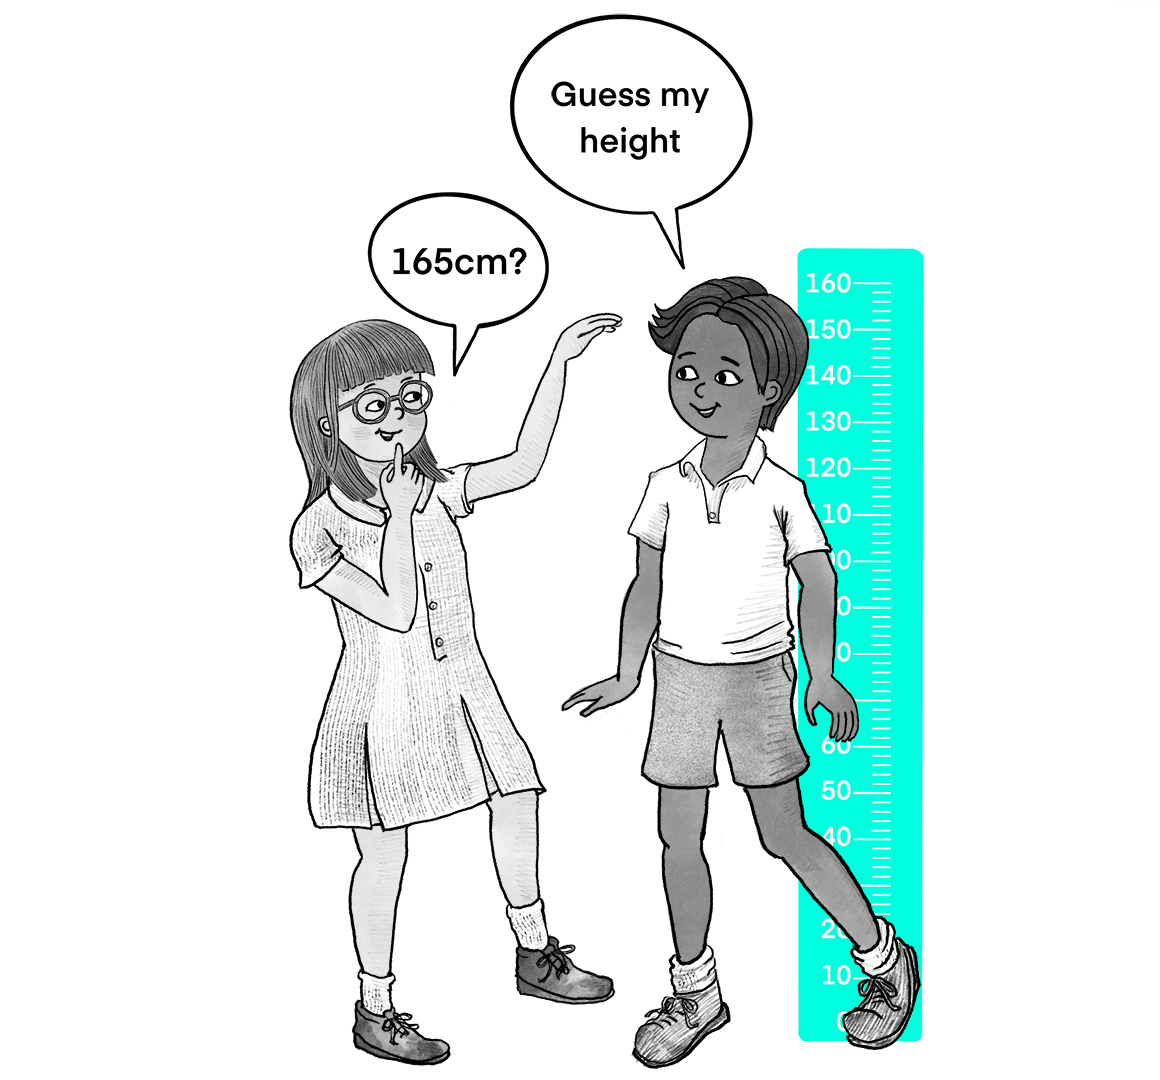 A boy says 'guess my height' and a girl replies '165cm?' 
           Behind there is a tape measure indicating that he is actually 160cm tall.